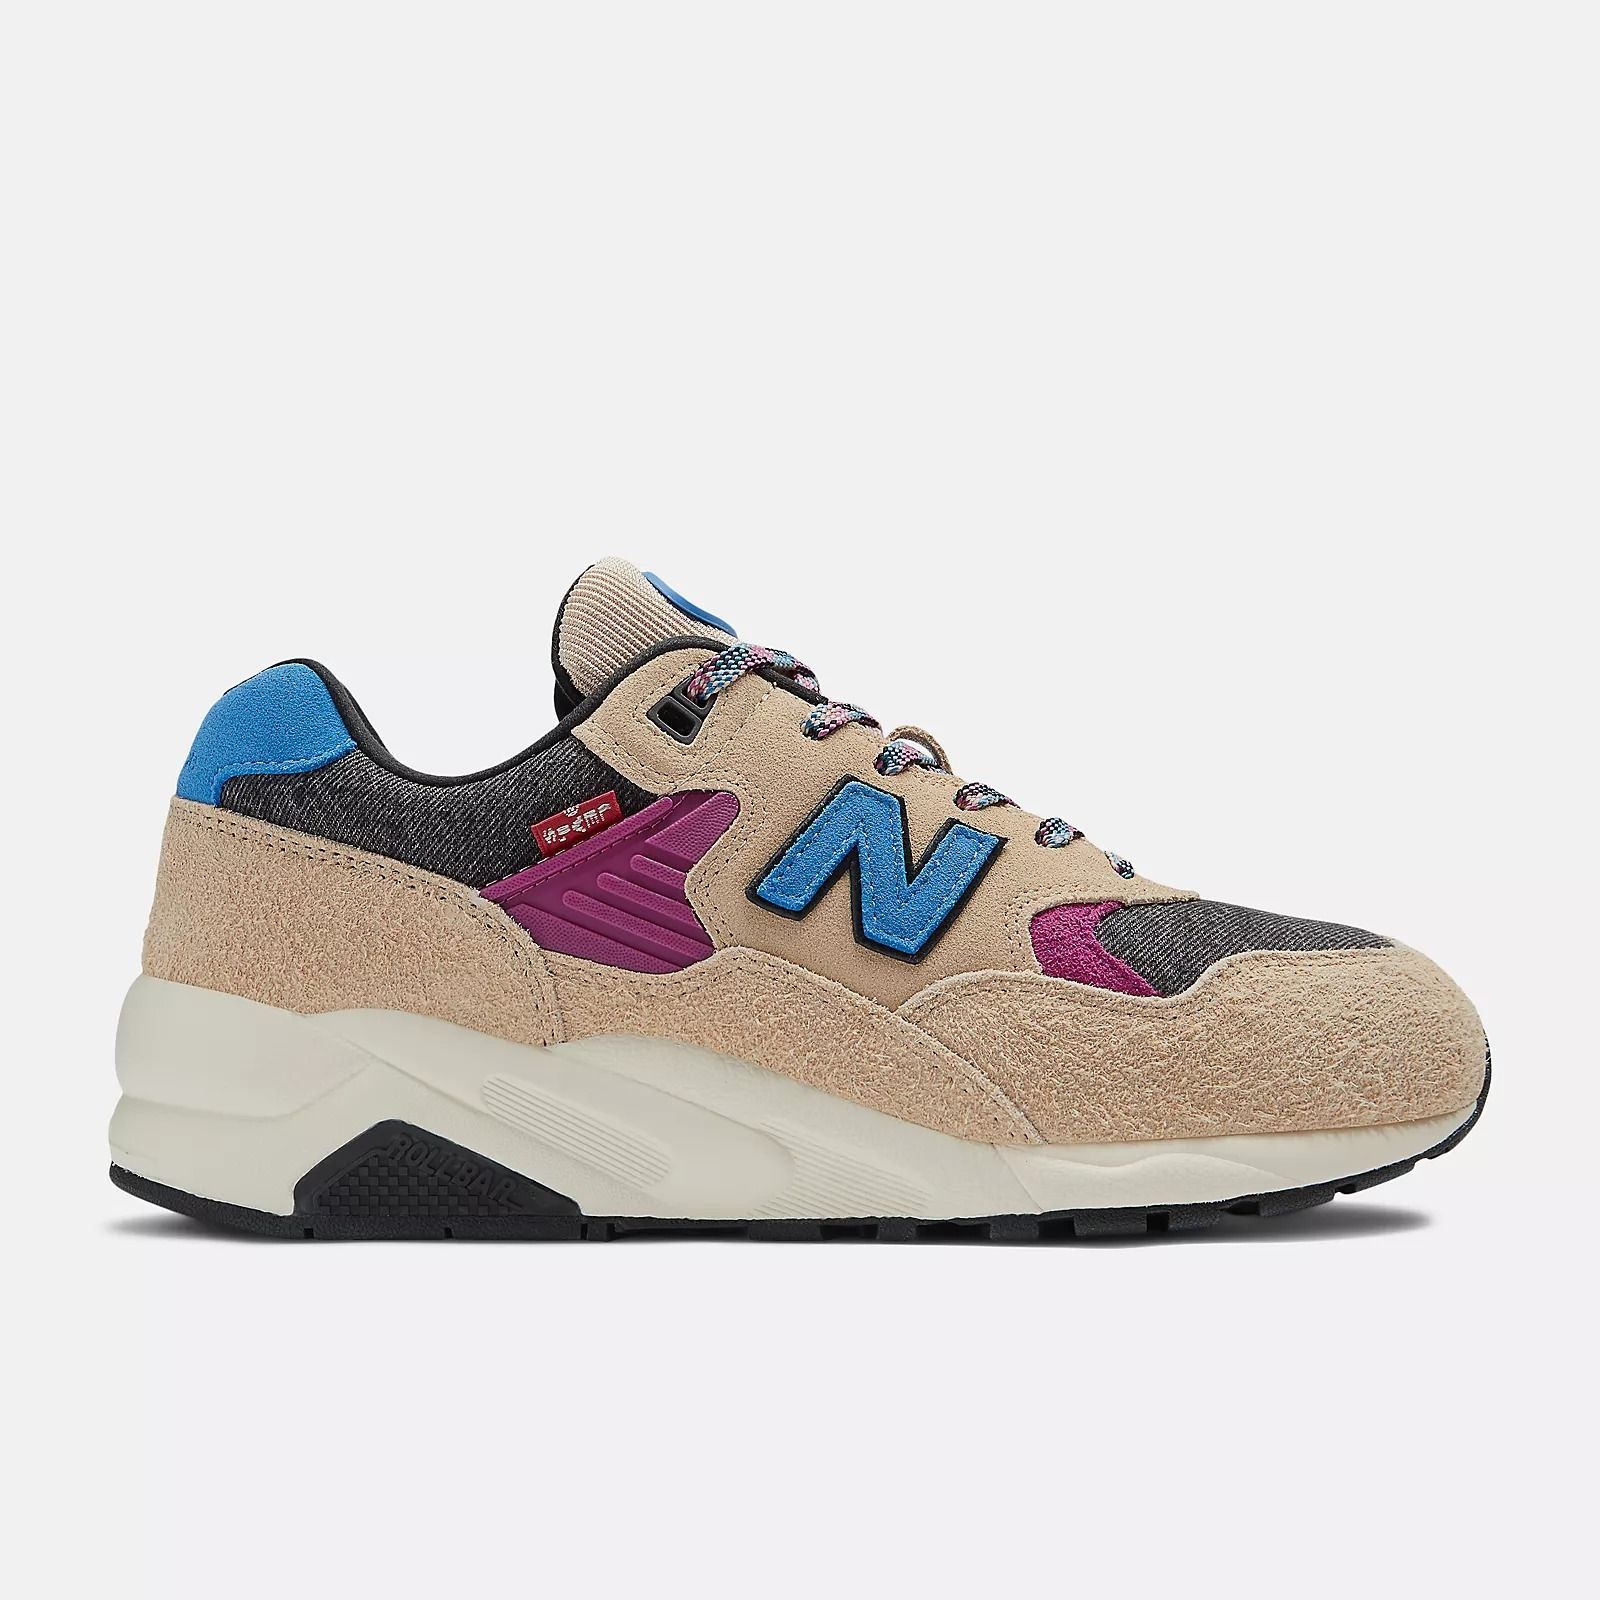 New Balance Sneakers, Shoes & Apparel | UP THERE